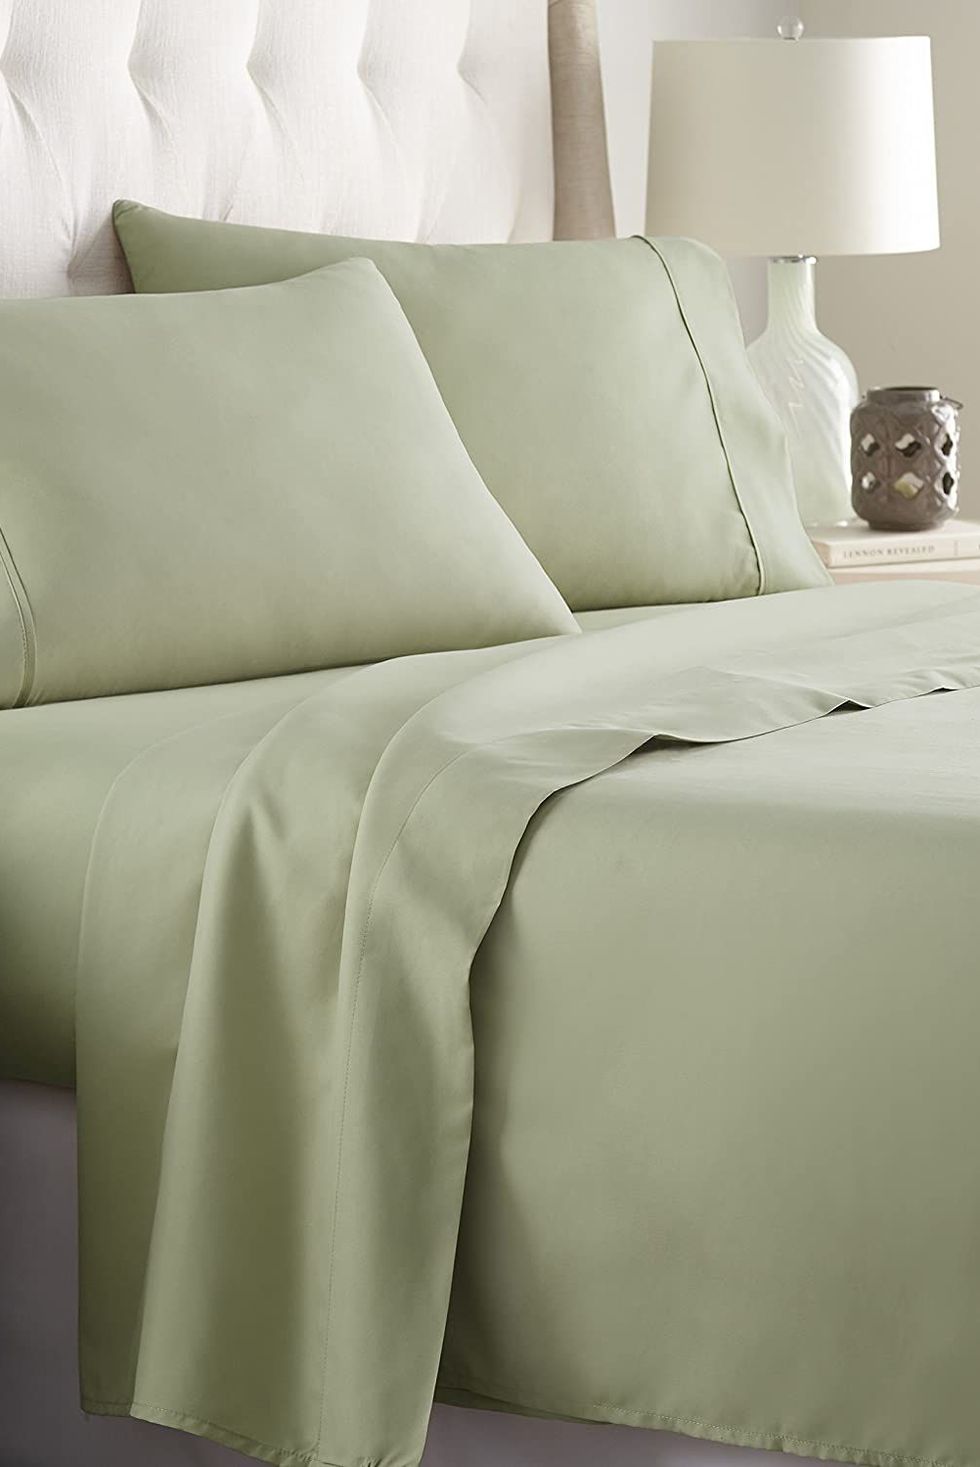 17 Best Bed Sheets on Amazon Best Amazon Sheets According to Reviews